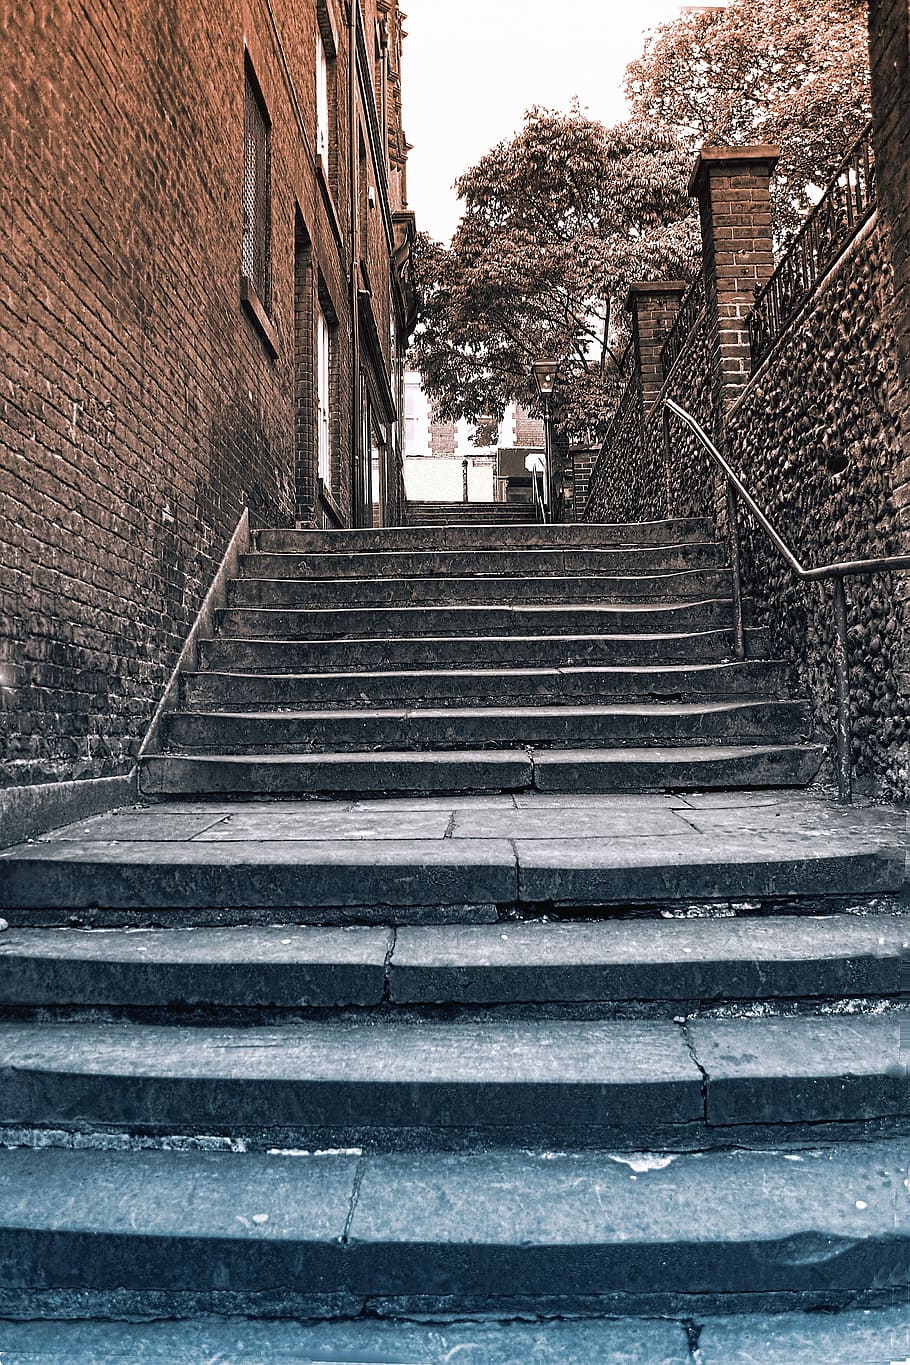 HD wallpaper: Steps, Old, Street, City, Stone, urban, outdoor, staircase |  Wallpaper Flare